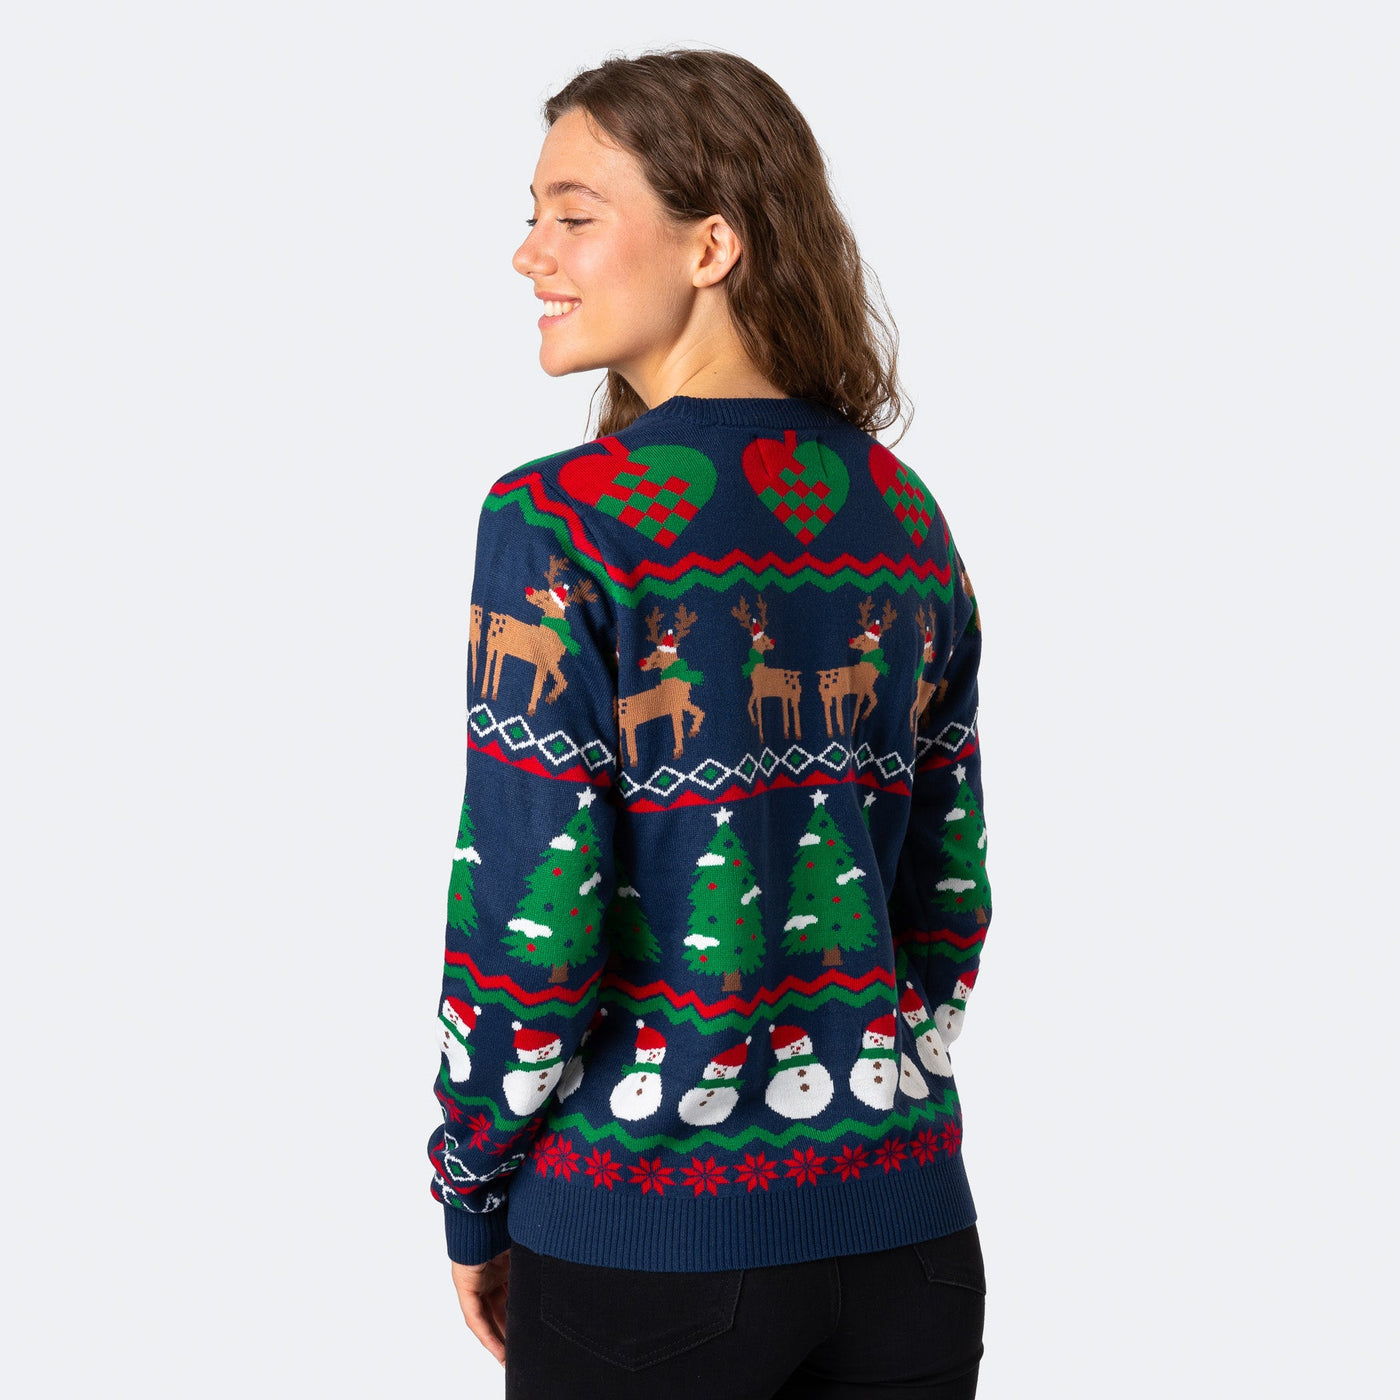 Women's Ugly Blue Christmas Sweater